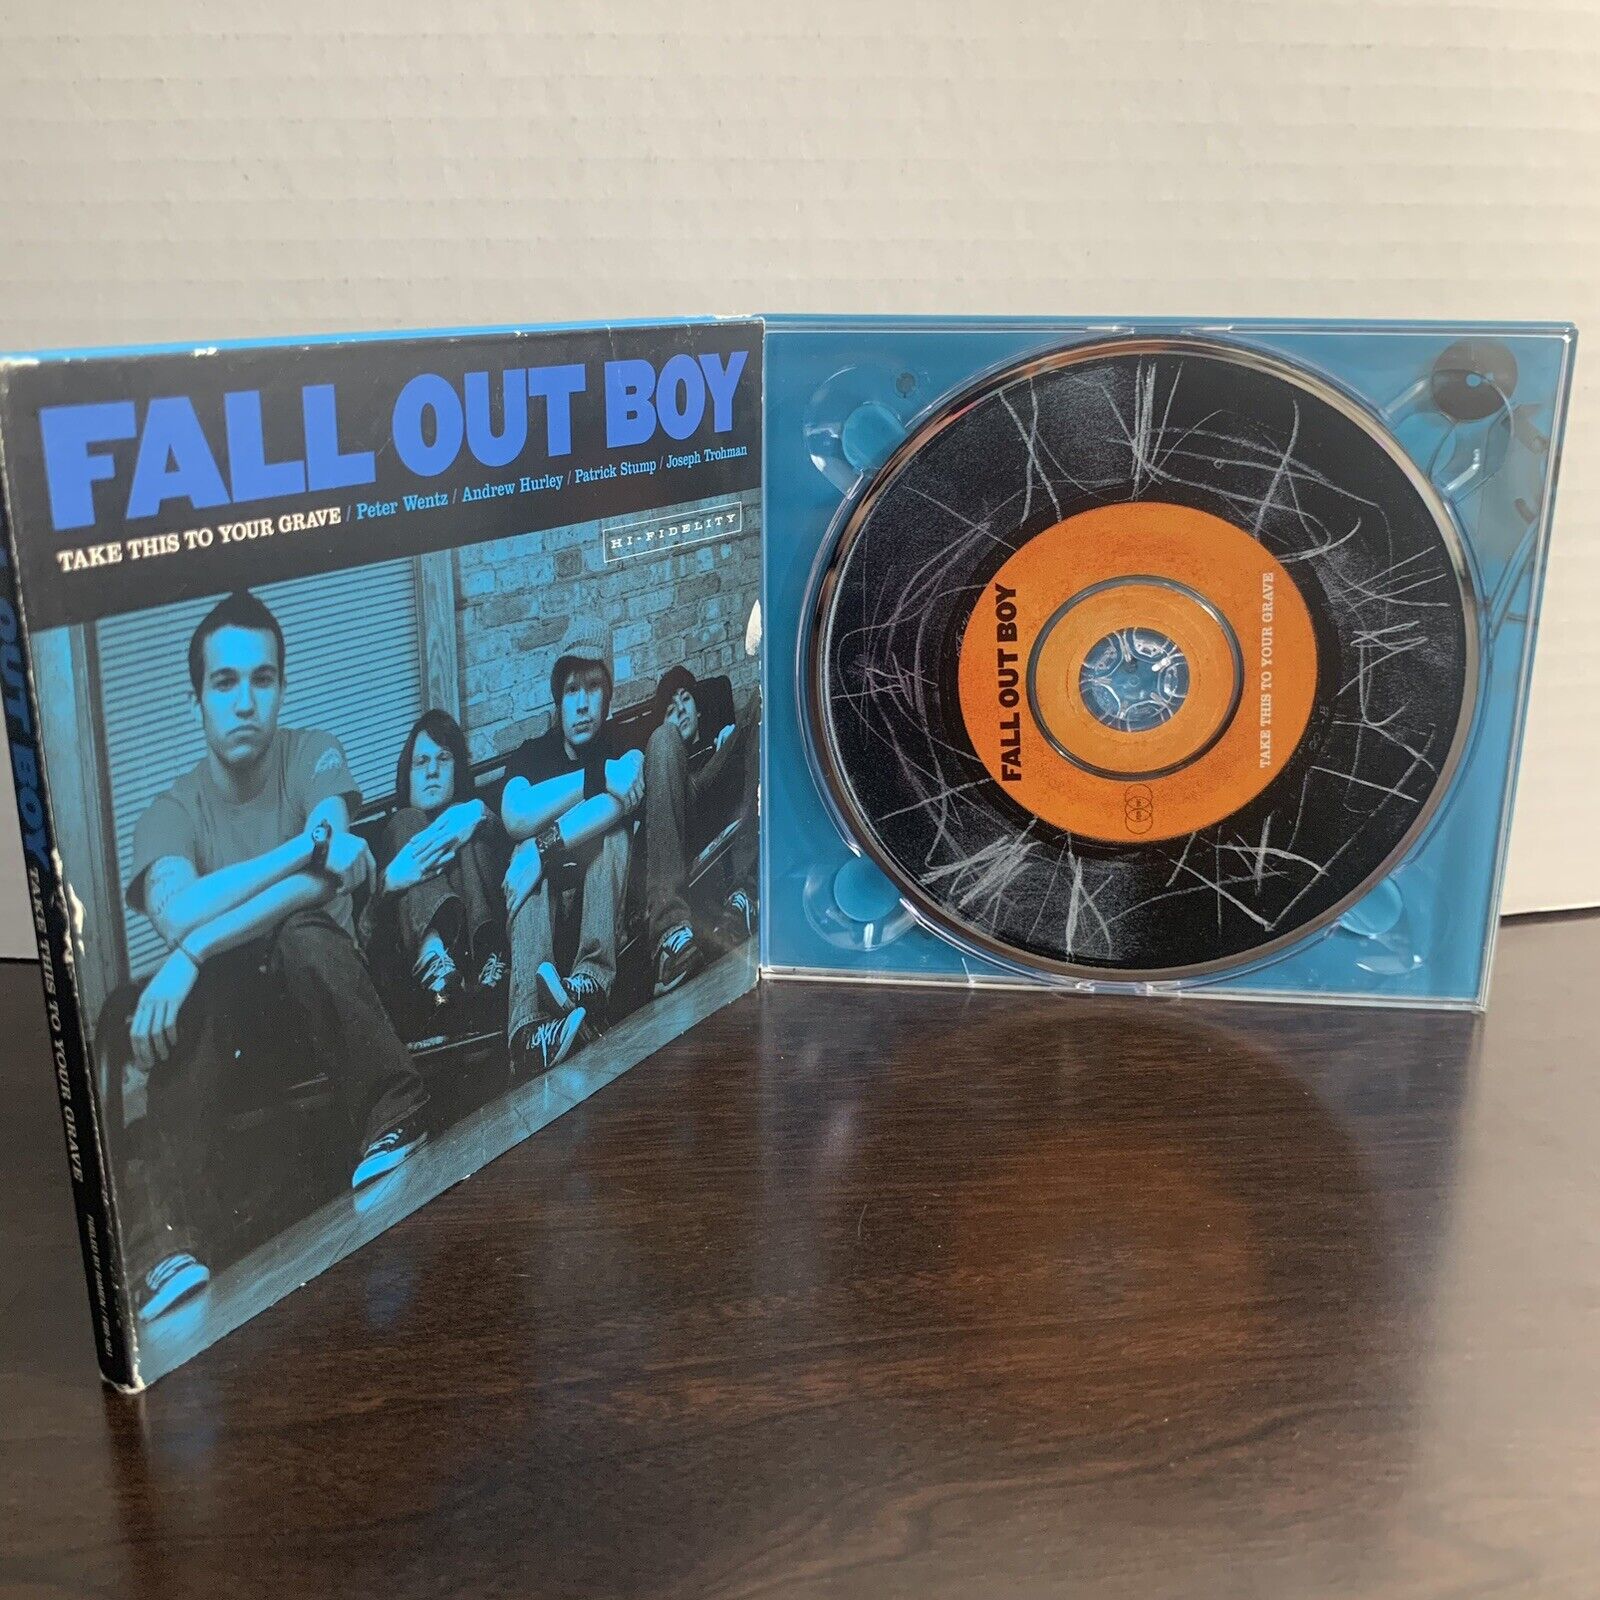 Take This to Your Grave by Fall Out Boy (CD, 2003) New Open Box Vintage